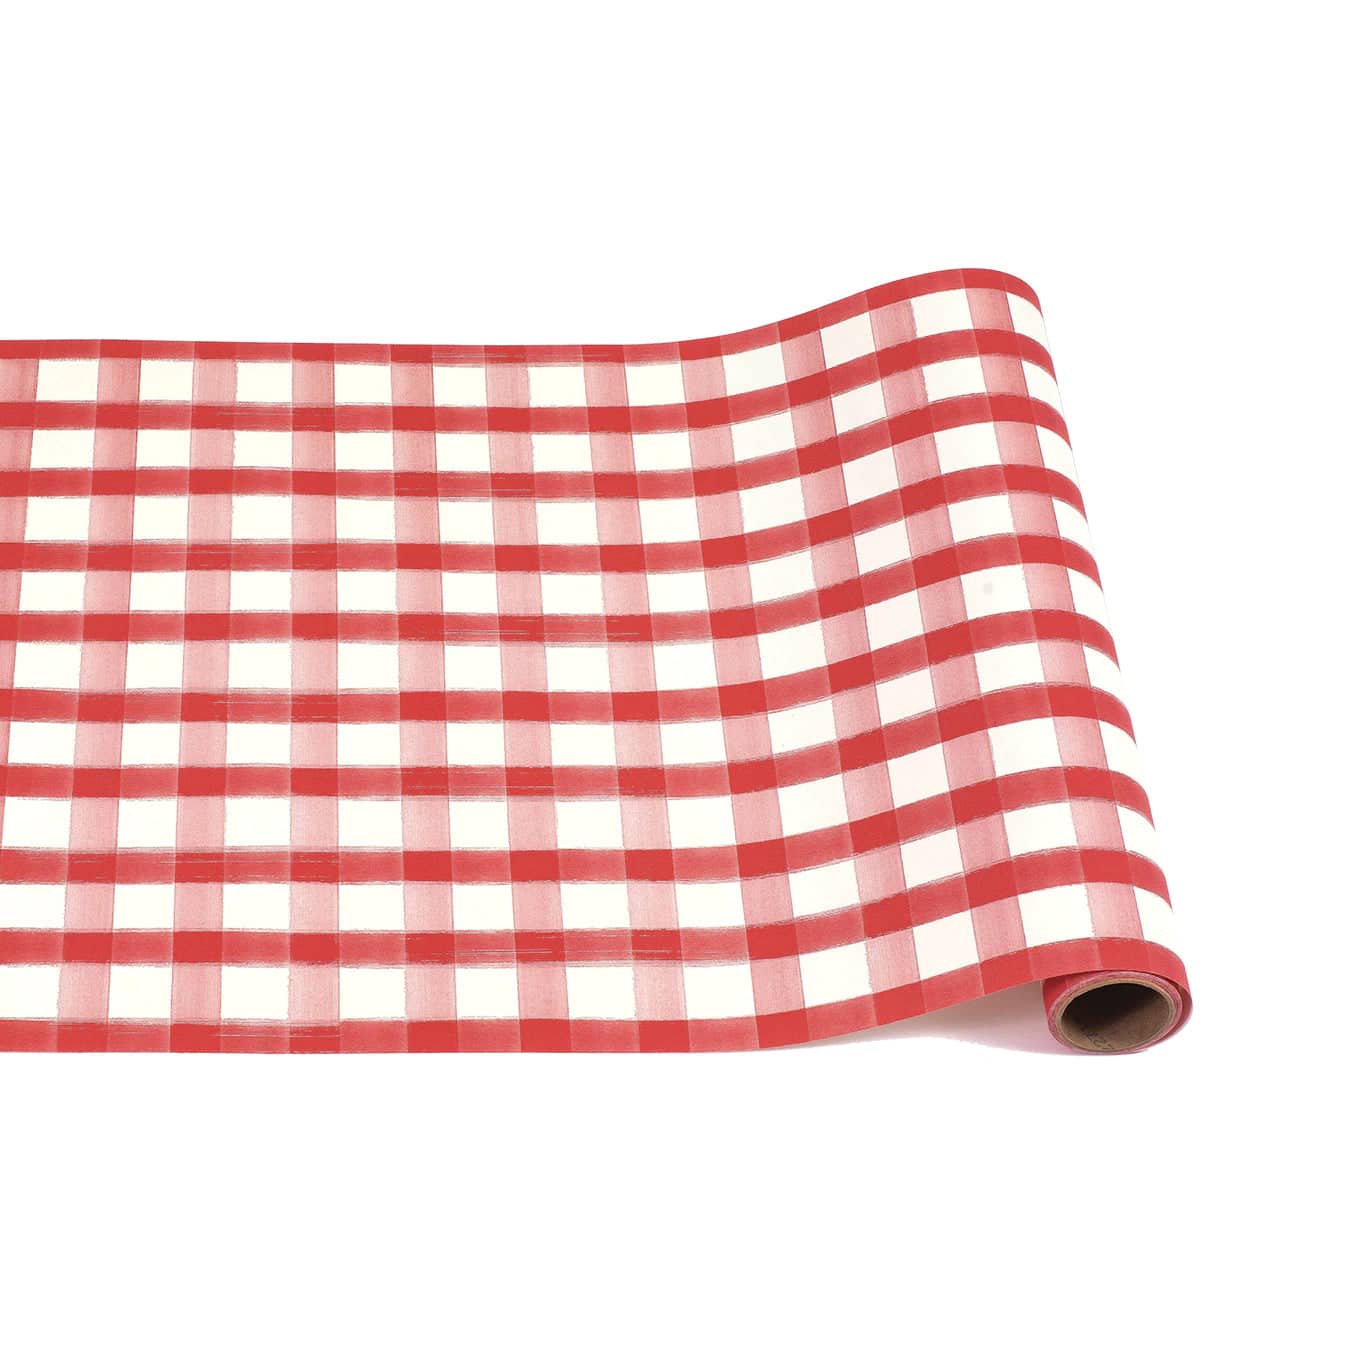 Red Painted Check Table Runner - The Preppy Bunny